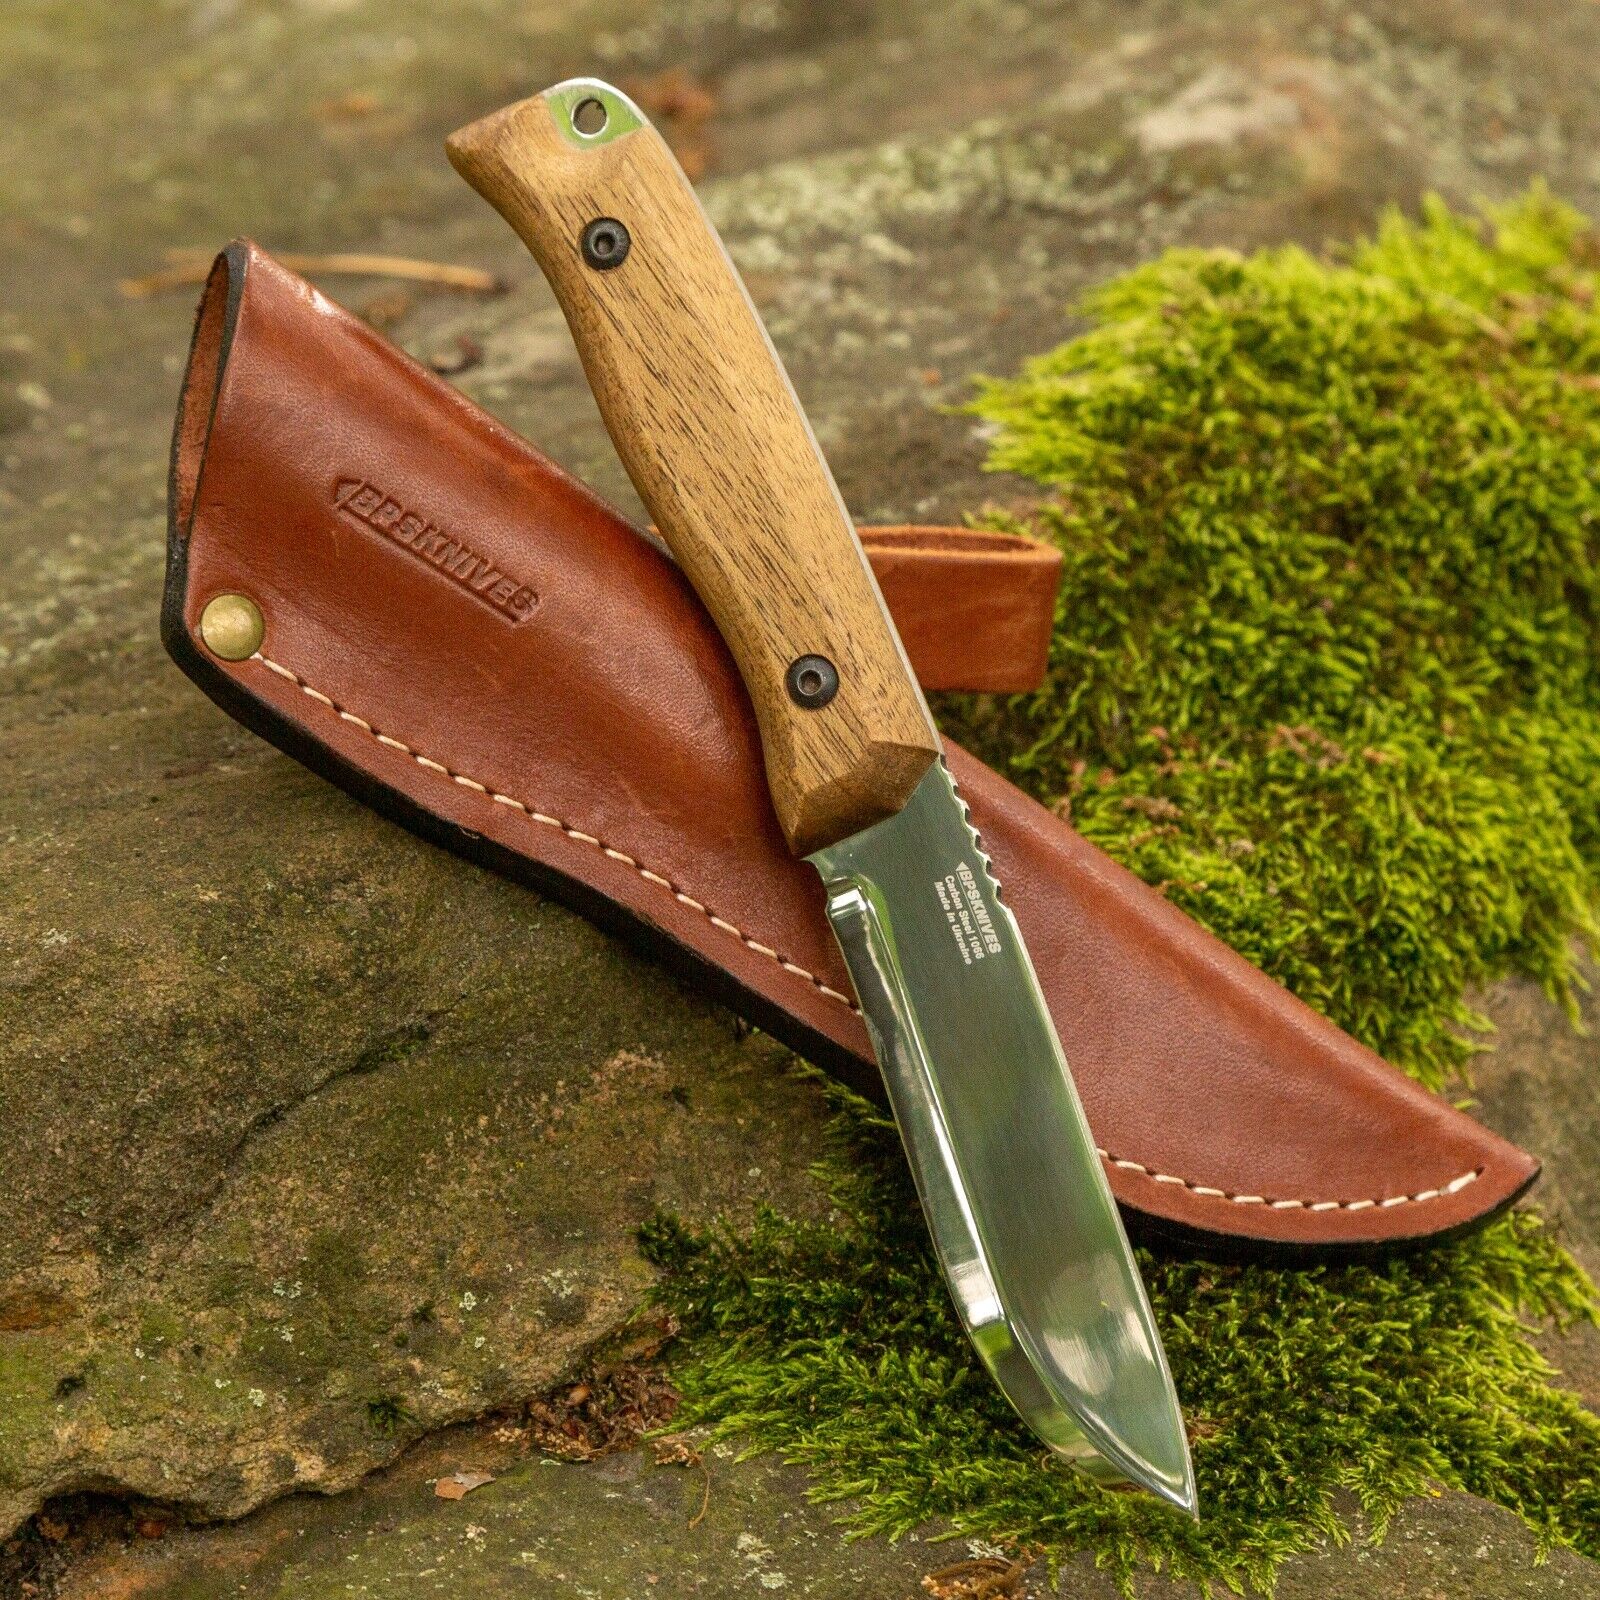 BPS Knives HK1 Bushcraft Full-Tang Fixed Blade Knife Carbon Steel Camping knife